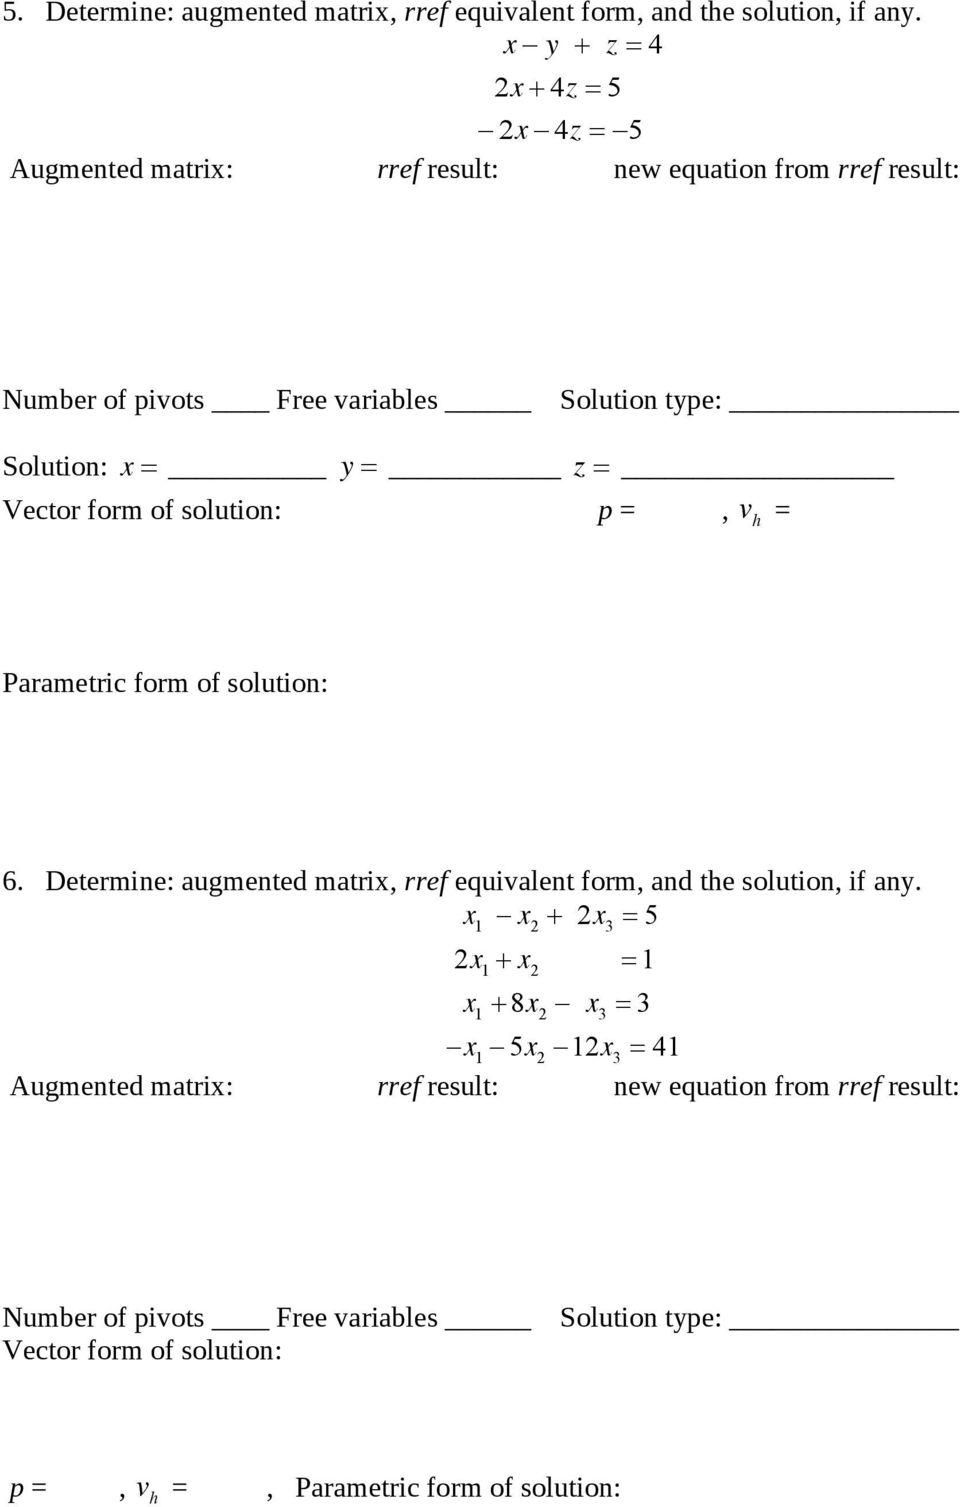 Determine: augmented matri, rref equivalent form, and the solution, if an.